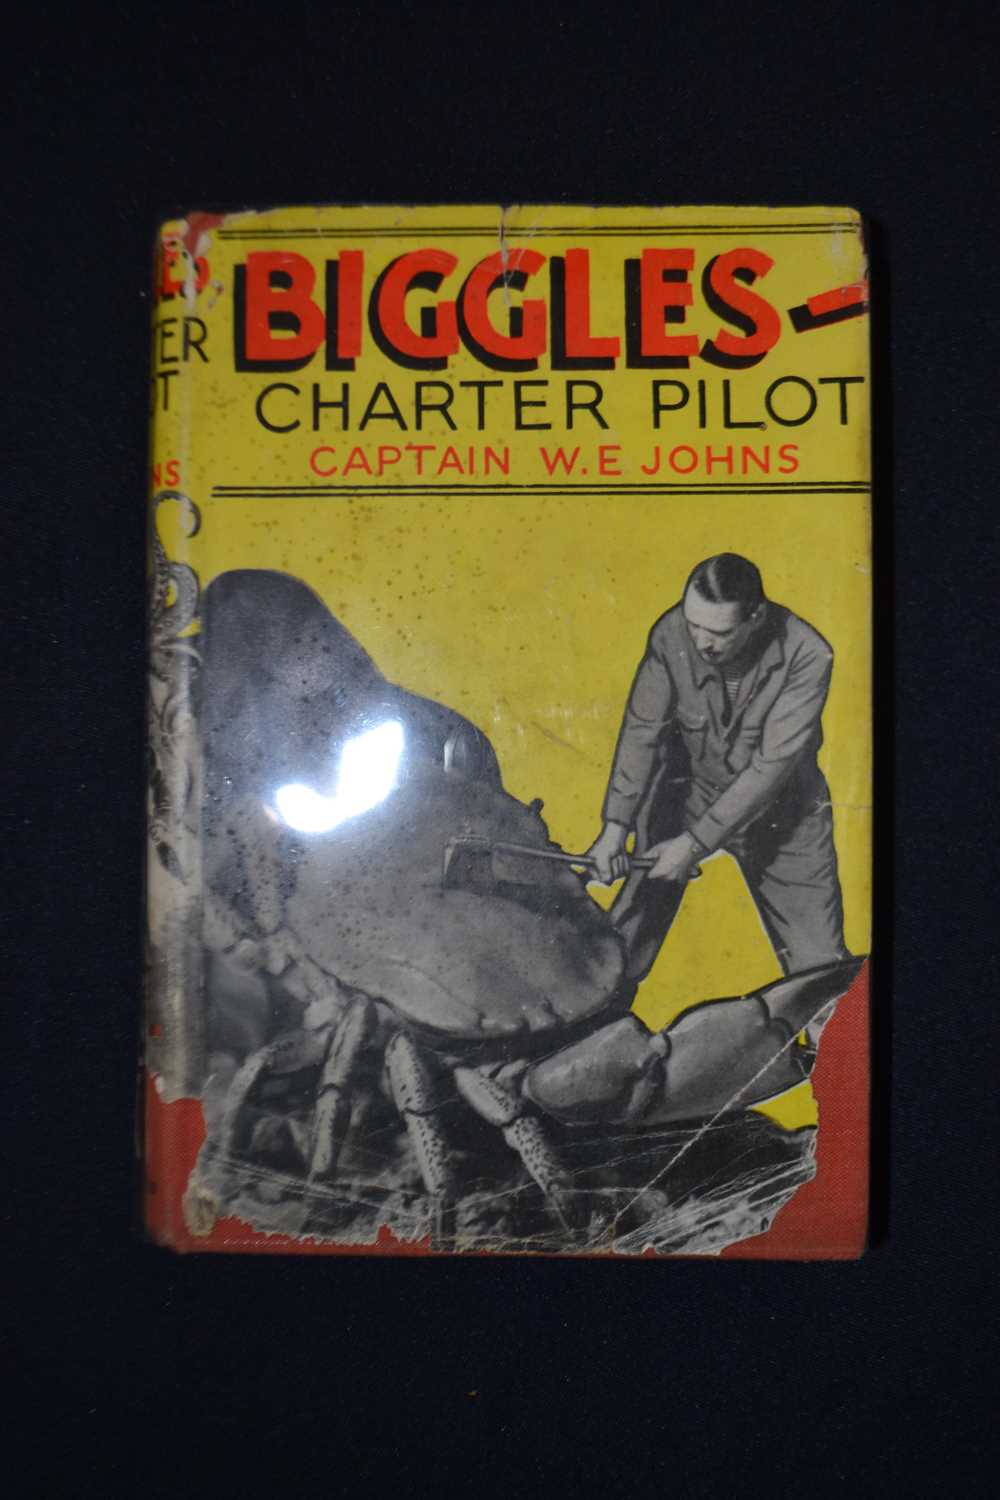 WE JOHNS: BIGGLES - CHARTER PILOT, London, OUP, 1943, First edition with dustjacket (tatty)